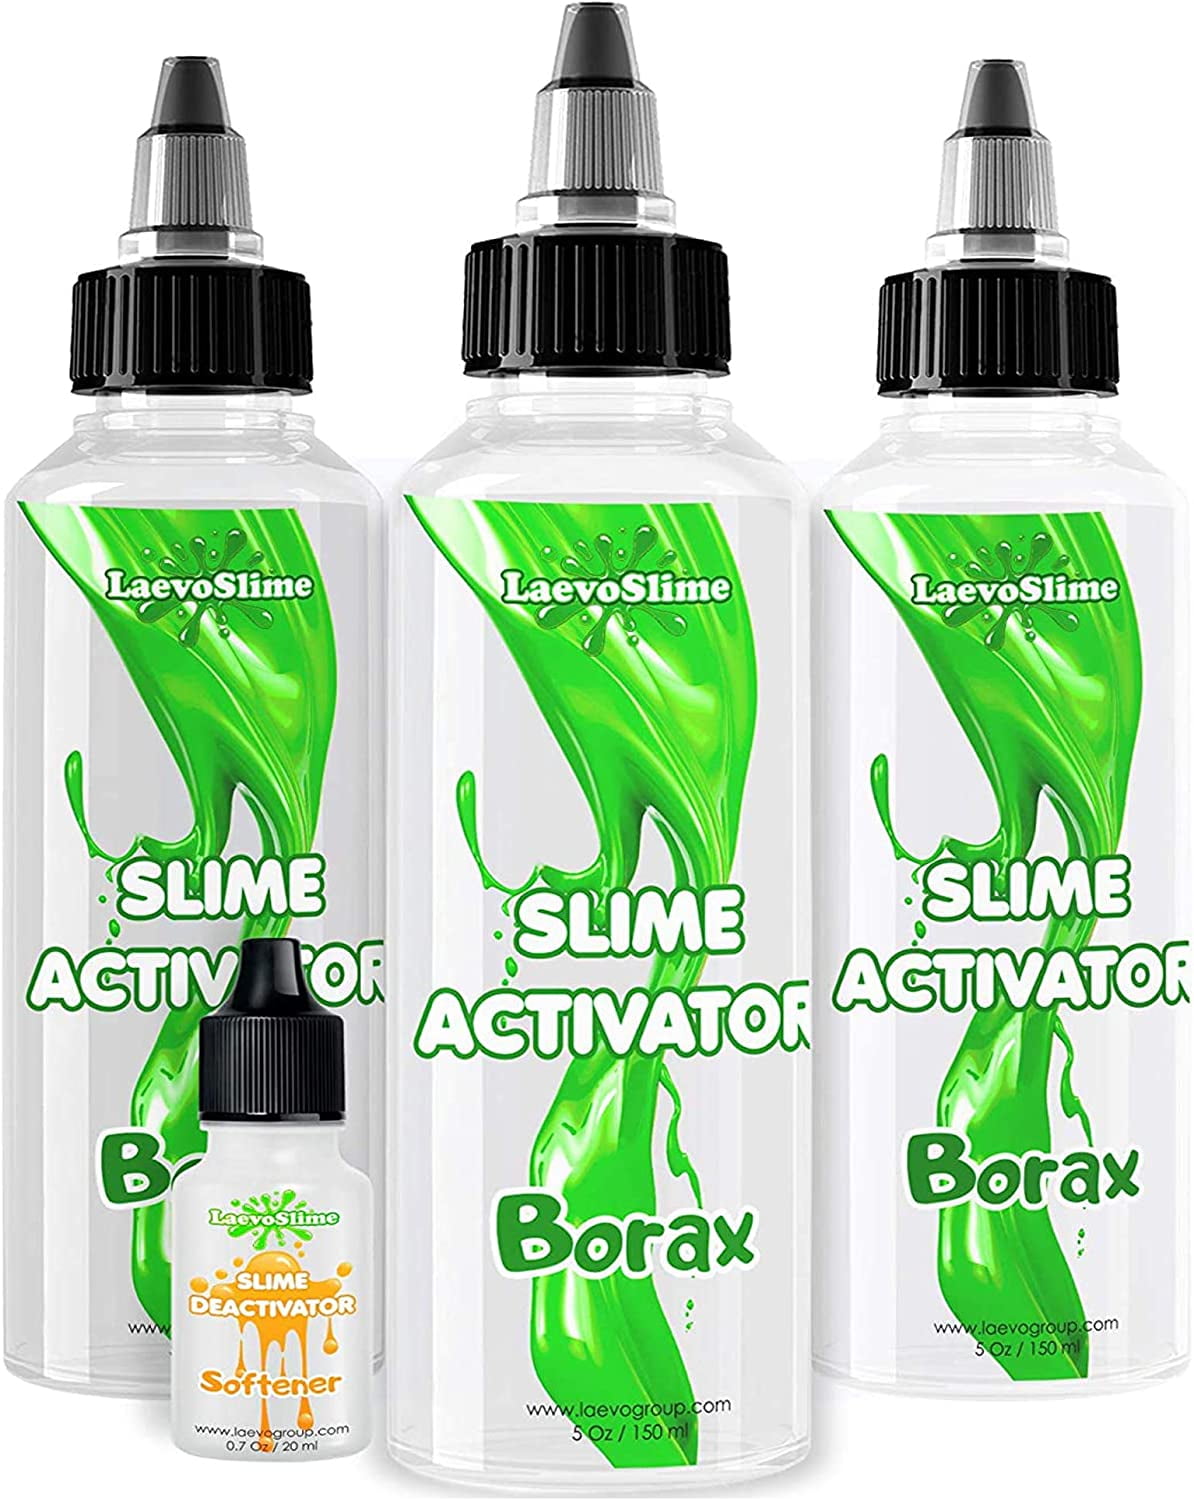  Slime Activator Borax Solution BEST VALUE KIT [15.2 oz] + BONUS  Deactivator to Save Your Slime - Add to Slime Glue or Elmers Glue -  Replaces Contact Solution, Liquid Starch, Saline